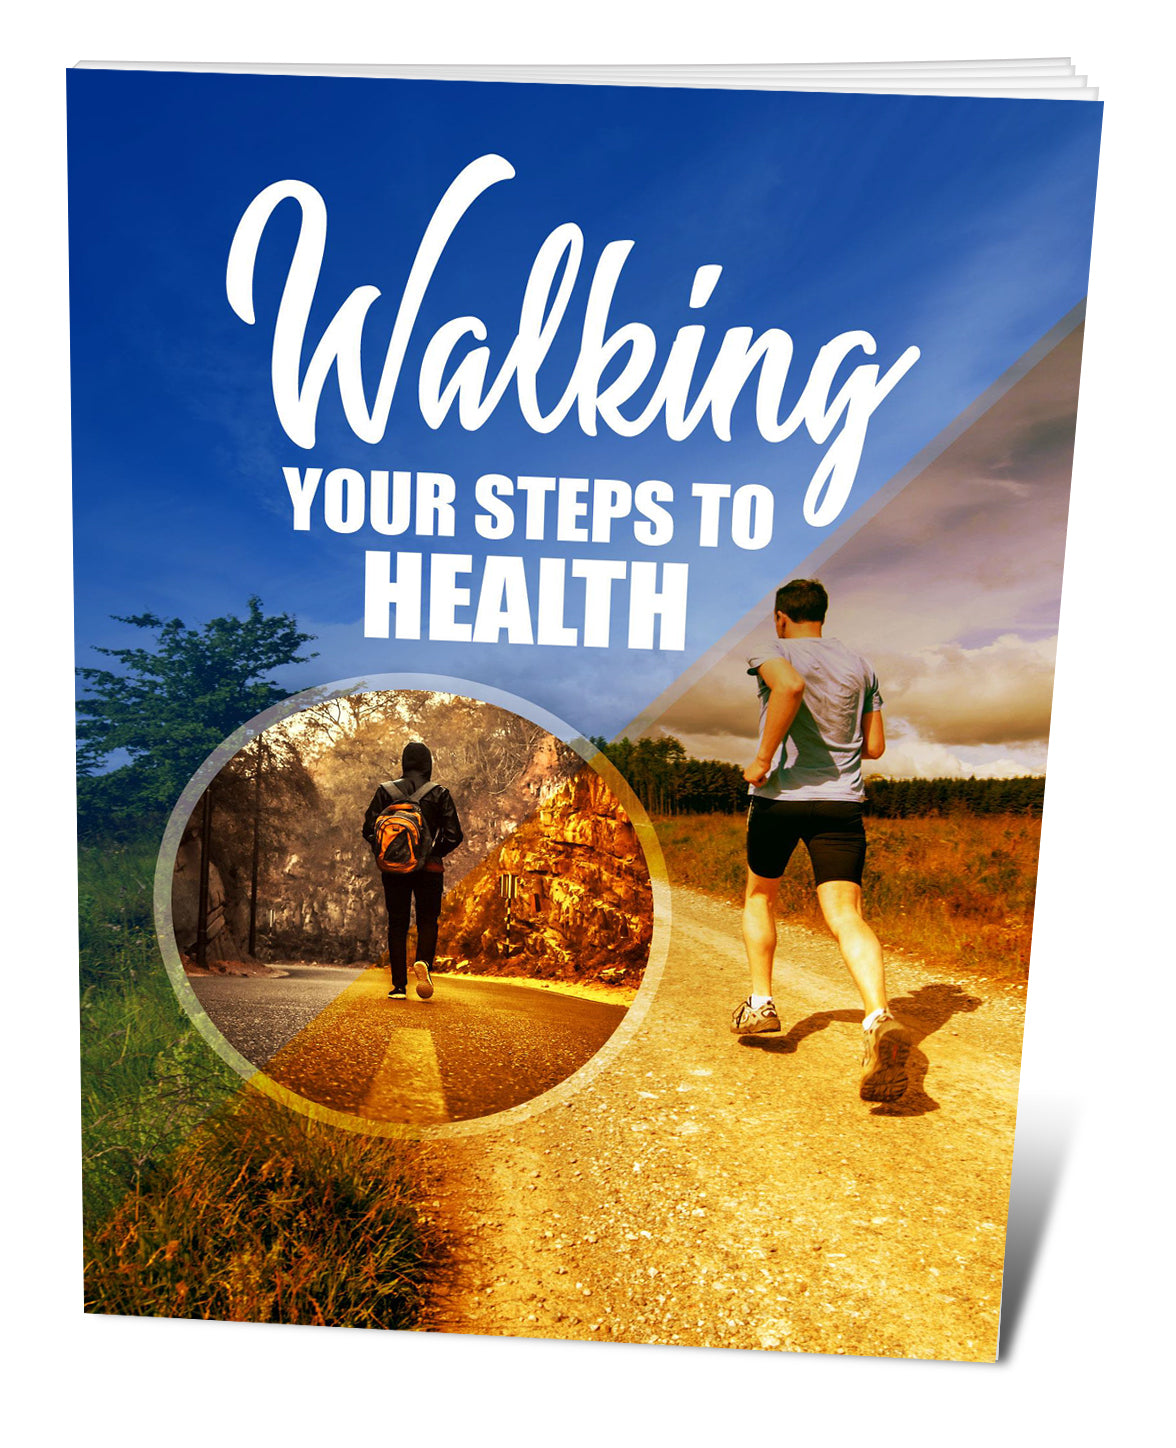 Walking - Your Steps to Health